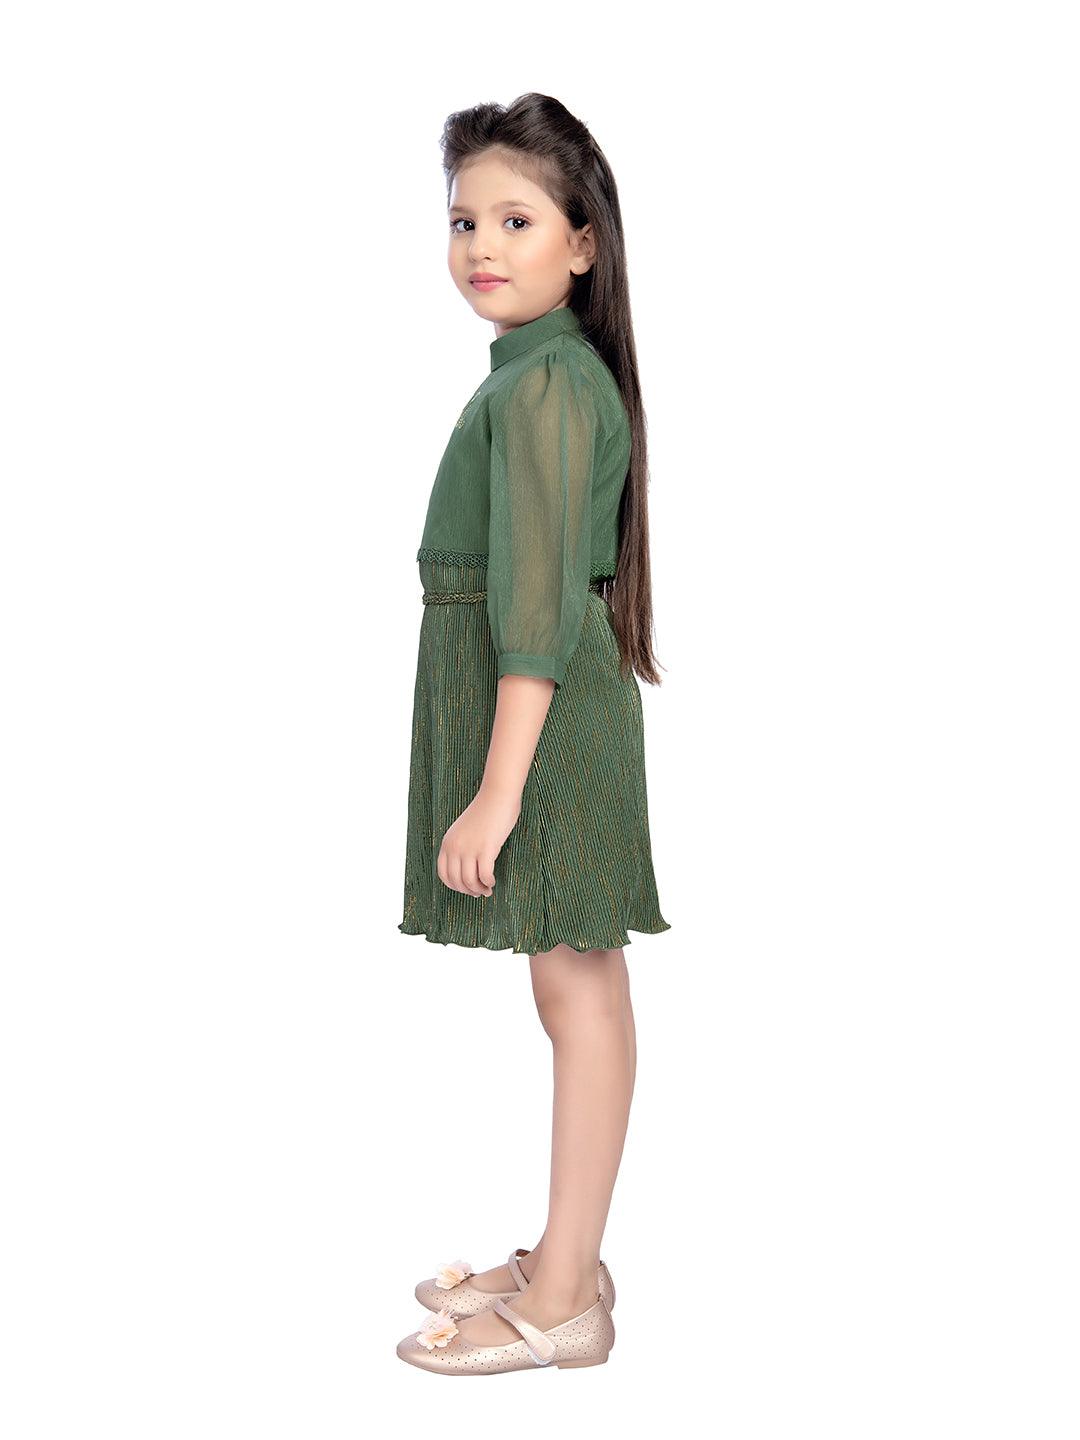 Tiny Baby Green Colored Dress - 2137 Green - TINY BABY INDIA shop.tinybaby.in